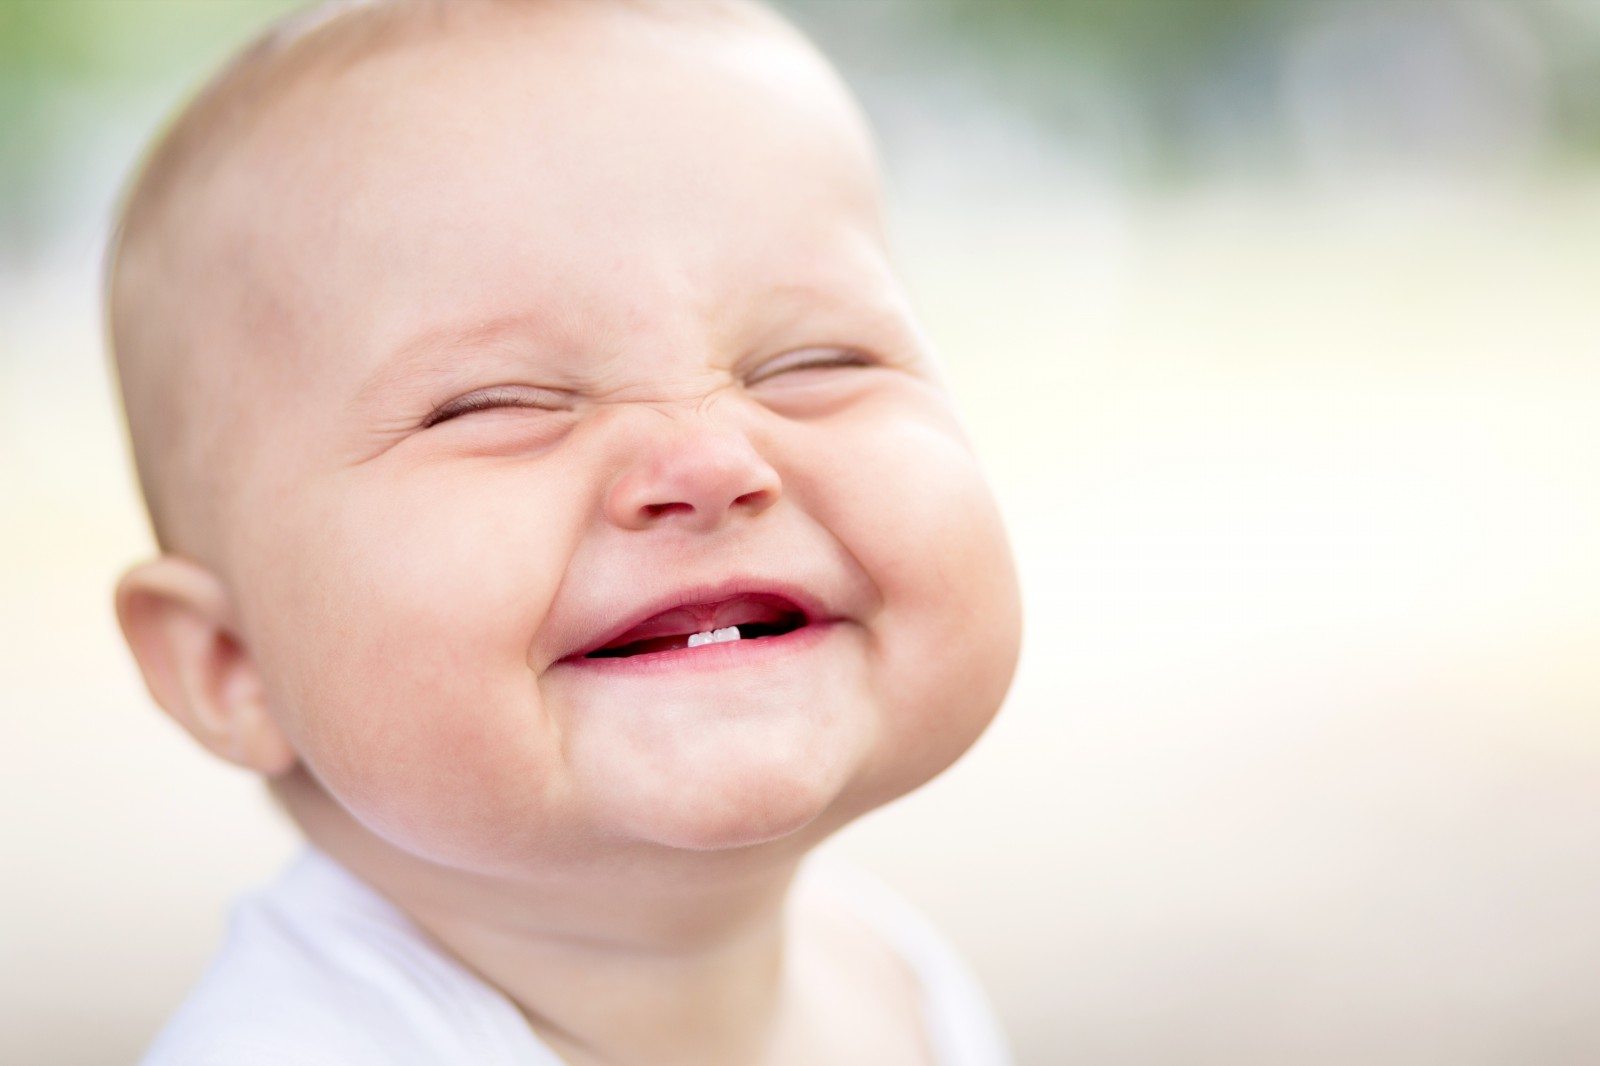 Smiling Cute Baby - Baby Smiling With Teeth - HD Wallpaper 